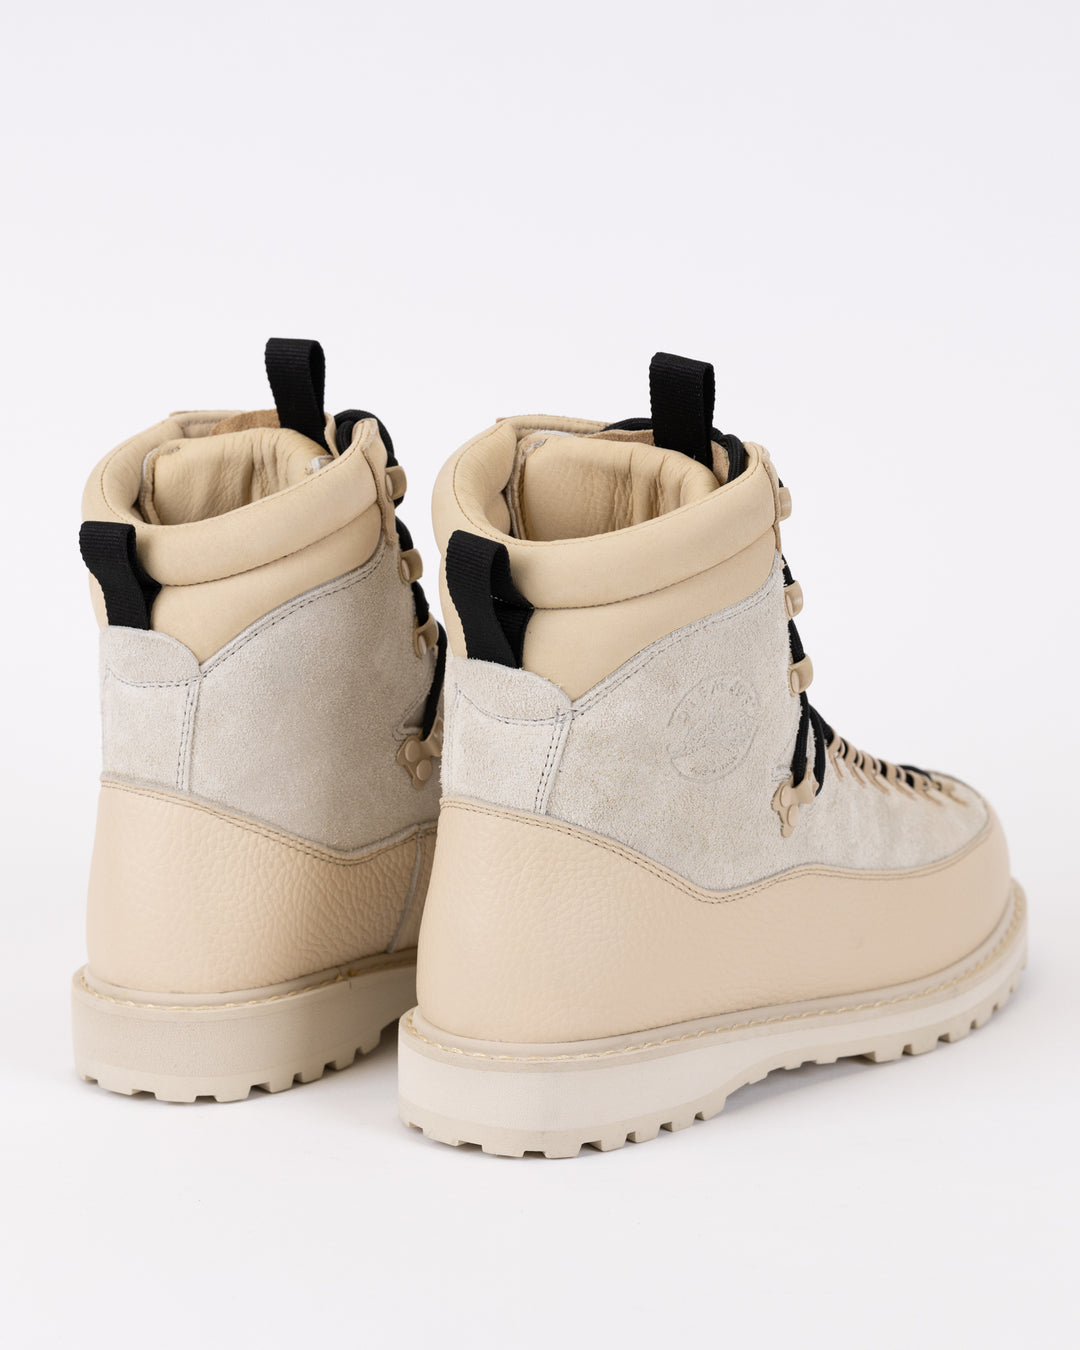 EVEREST Shearling Boots - Almond Milk